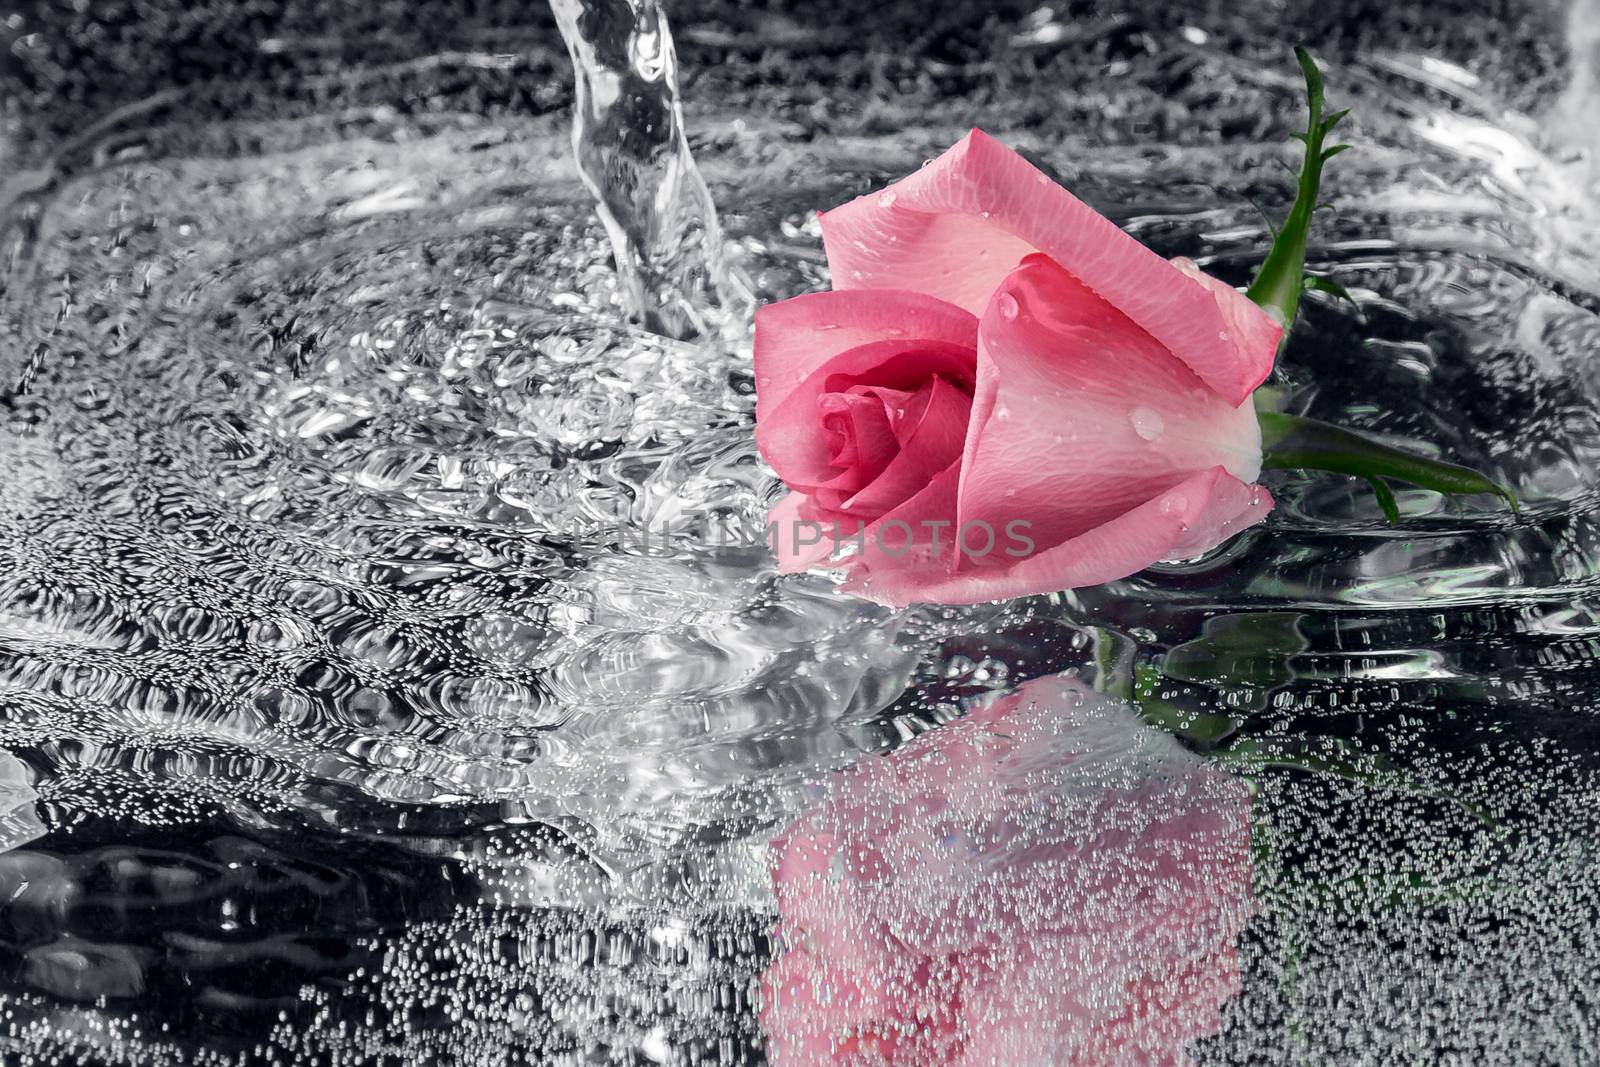 Rose falling into the water with a splash and spray.